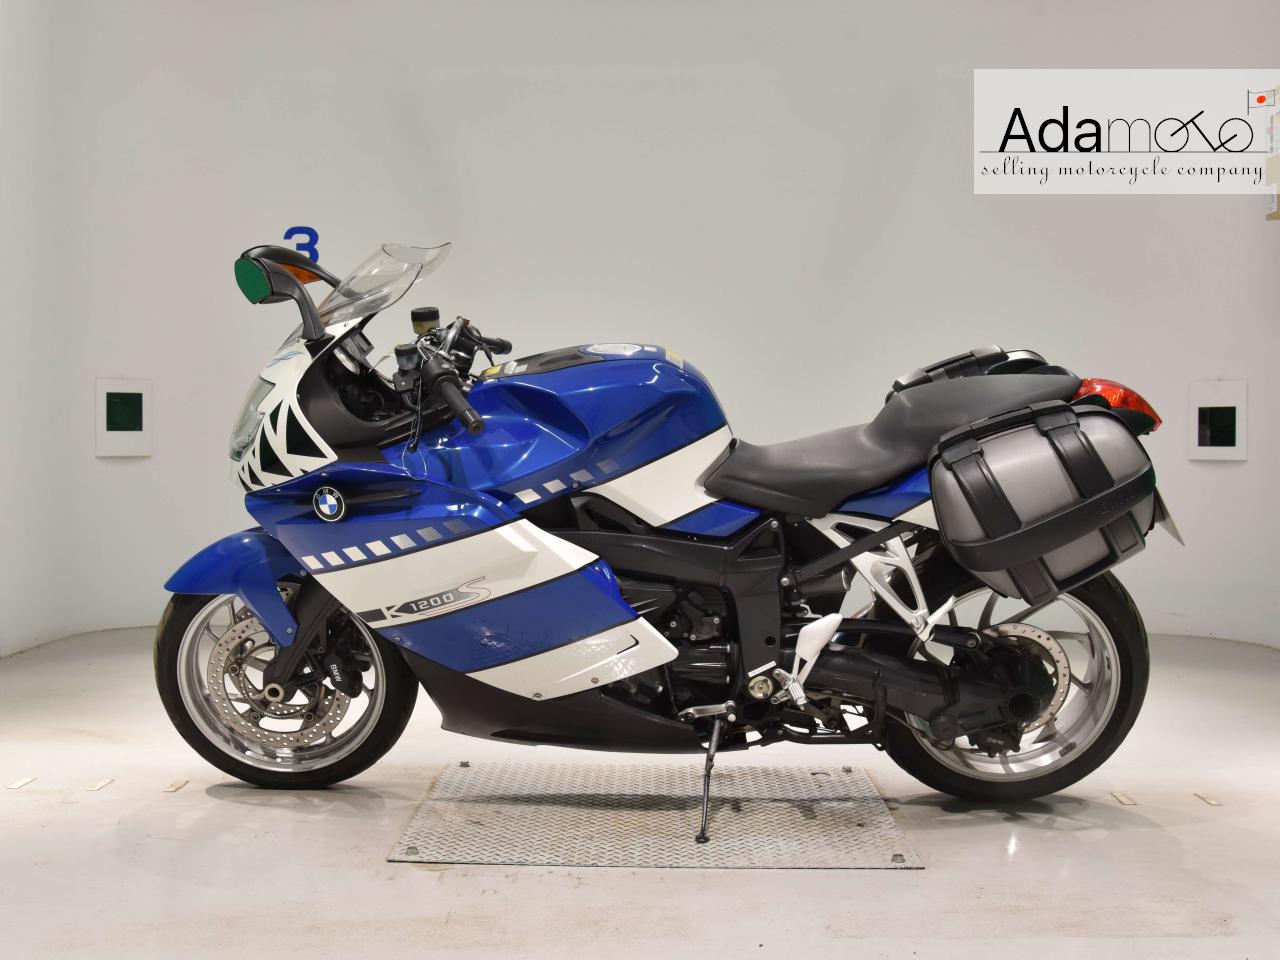 BMW K1200S - Adamoto - Motorcycles from Japan